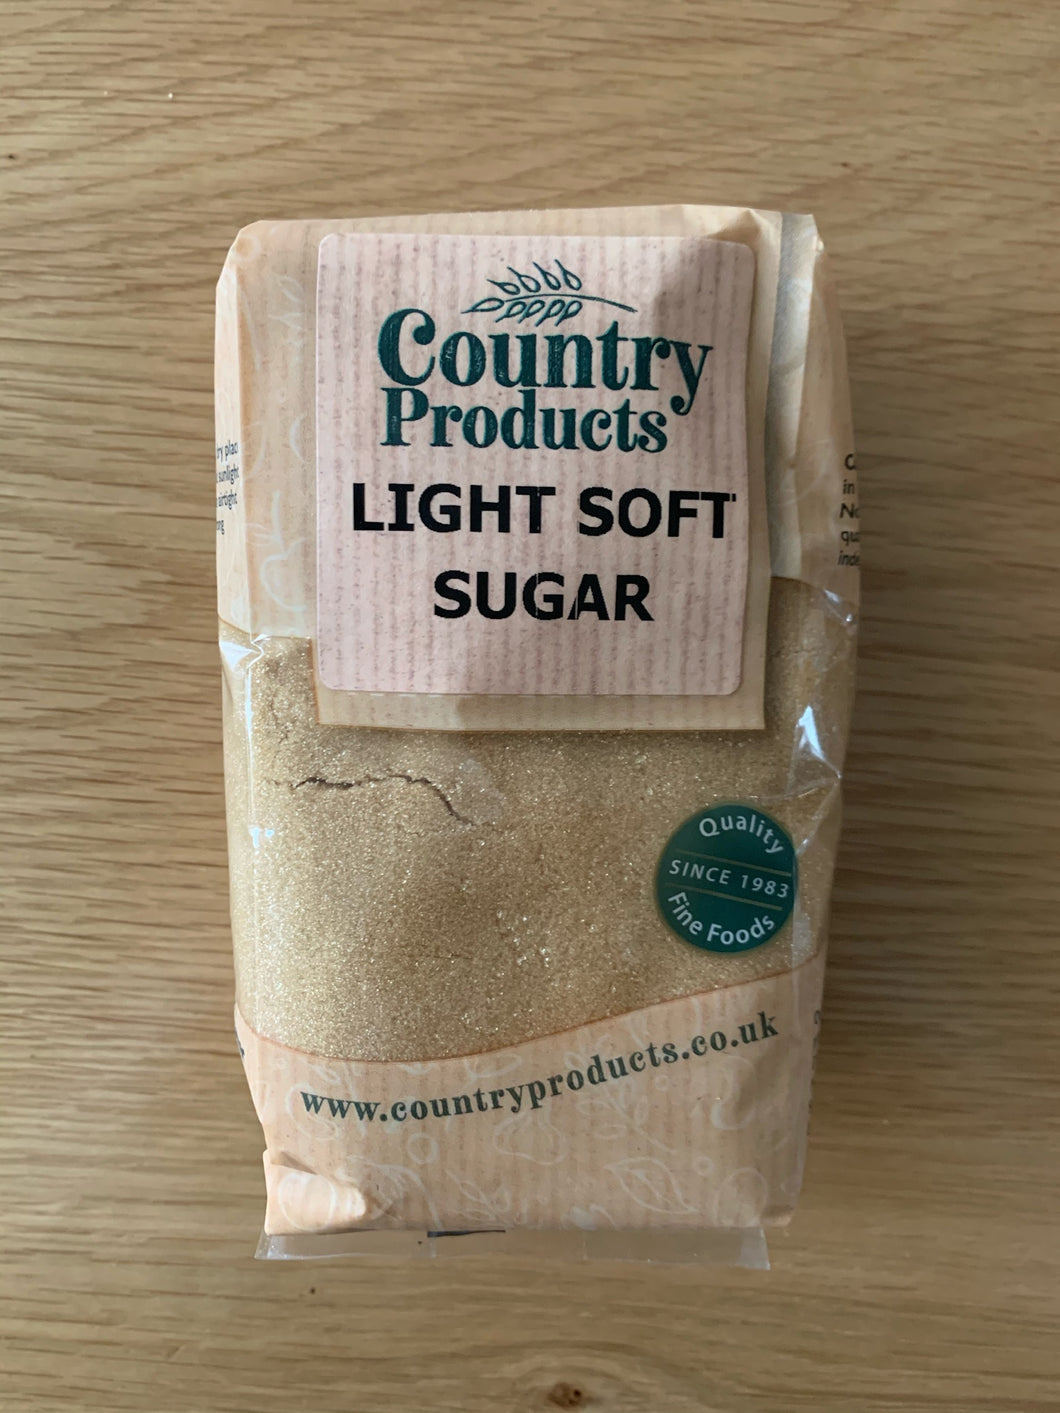 Light Soft Sugar - Country Products - 500g